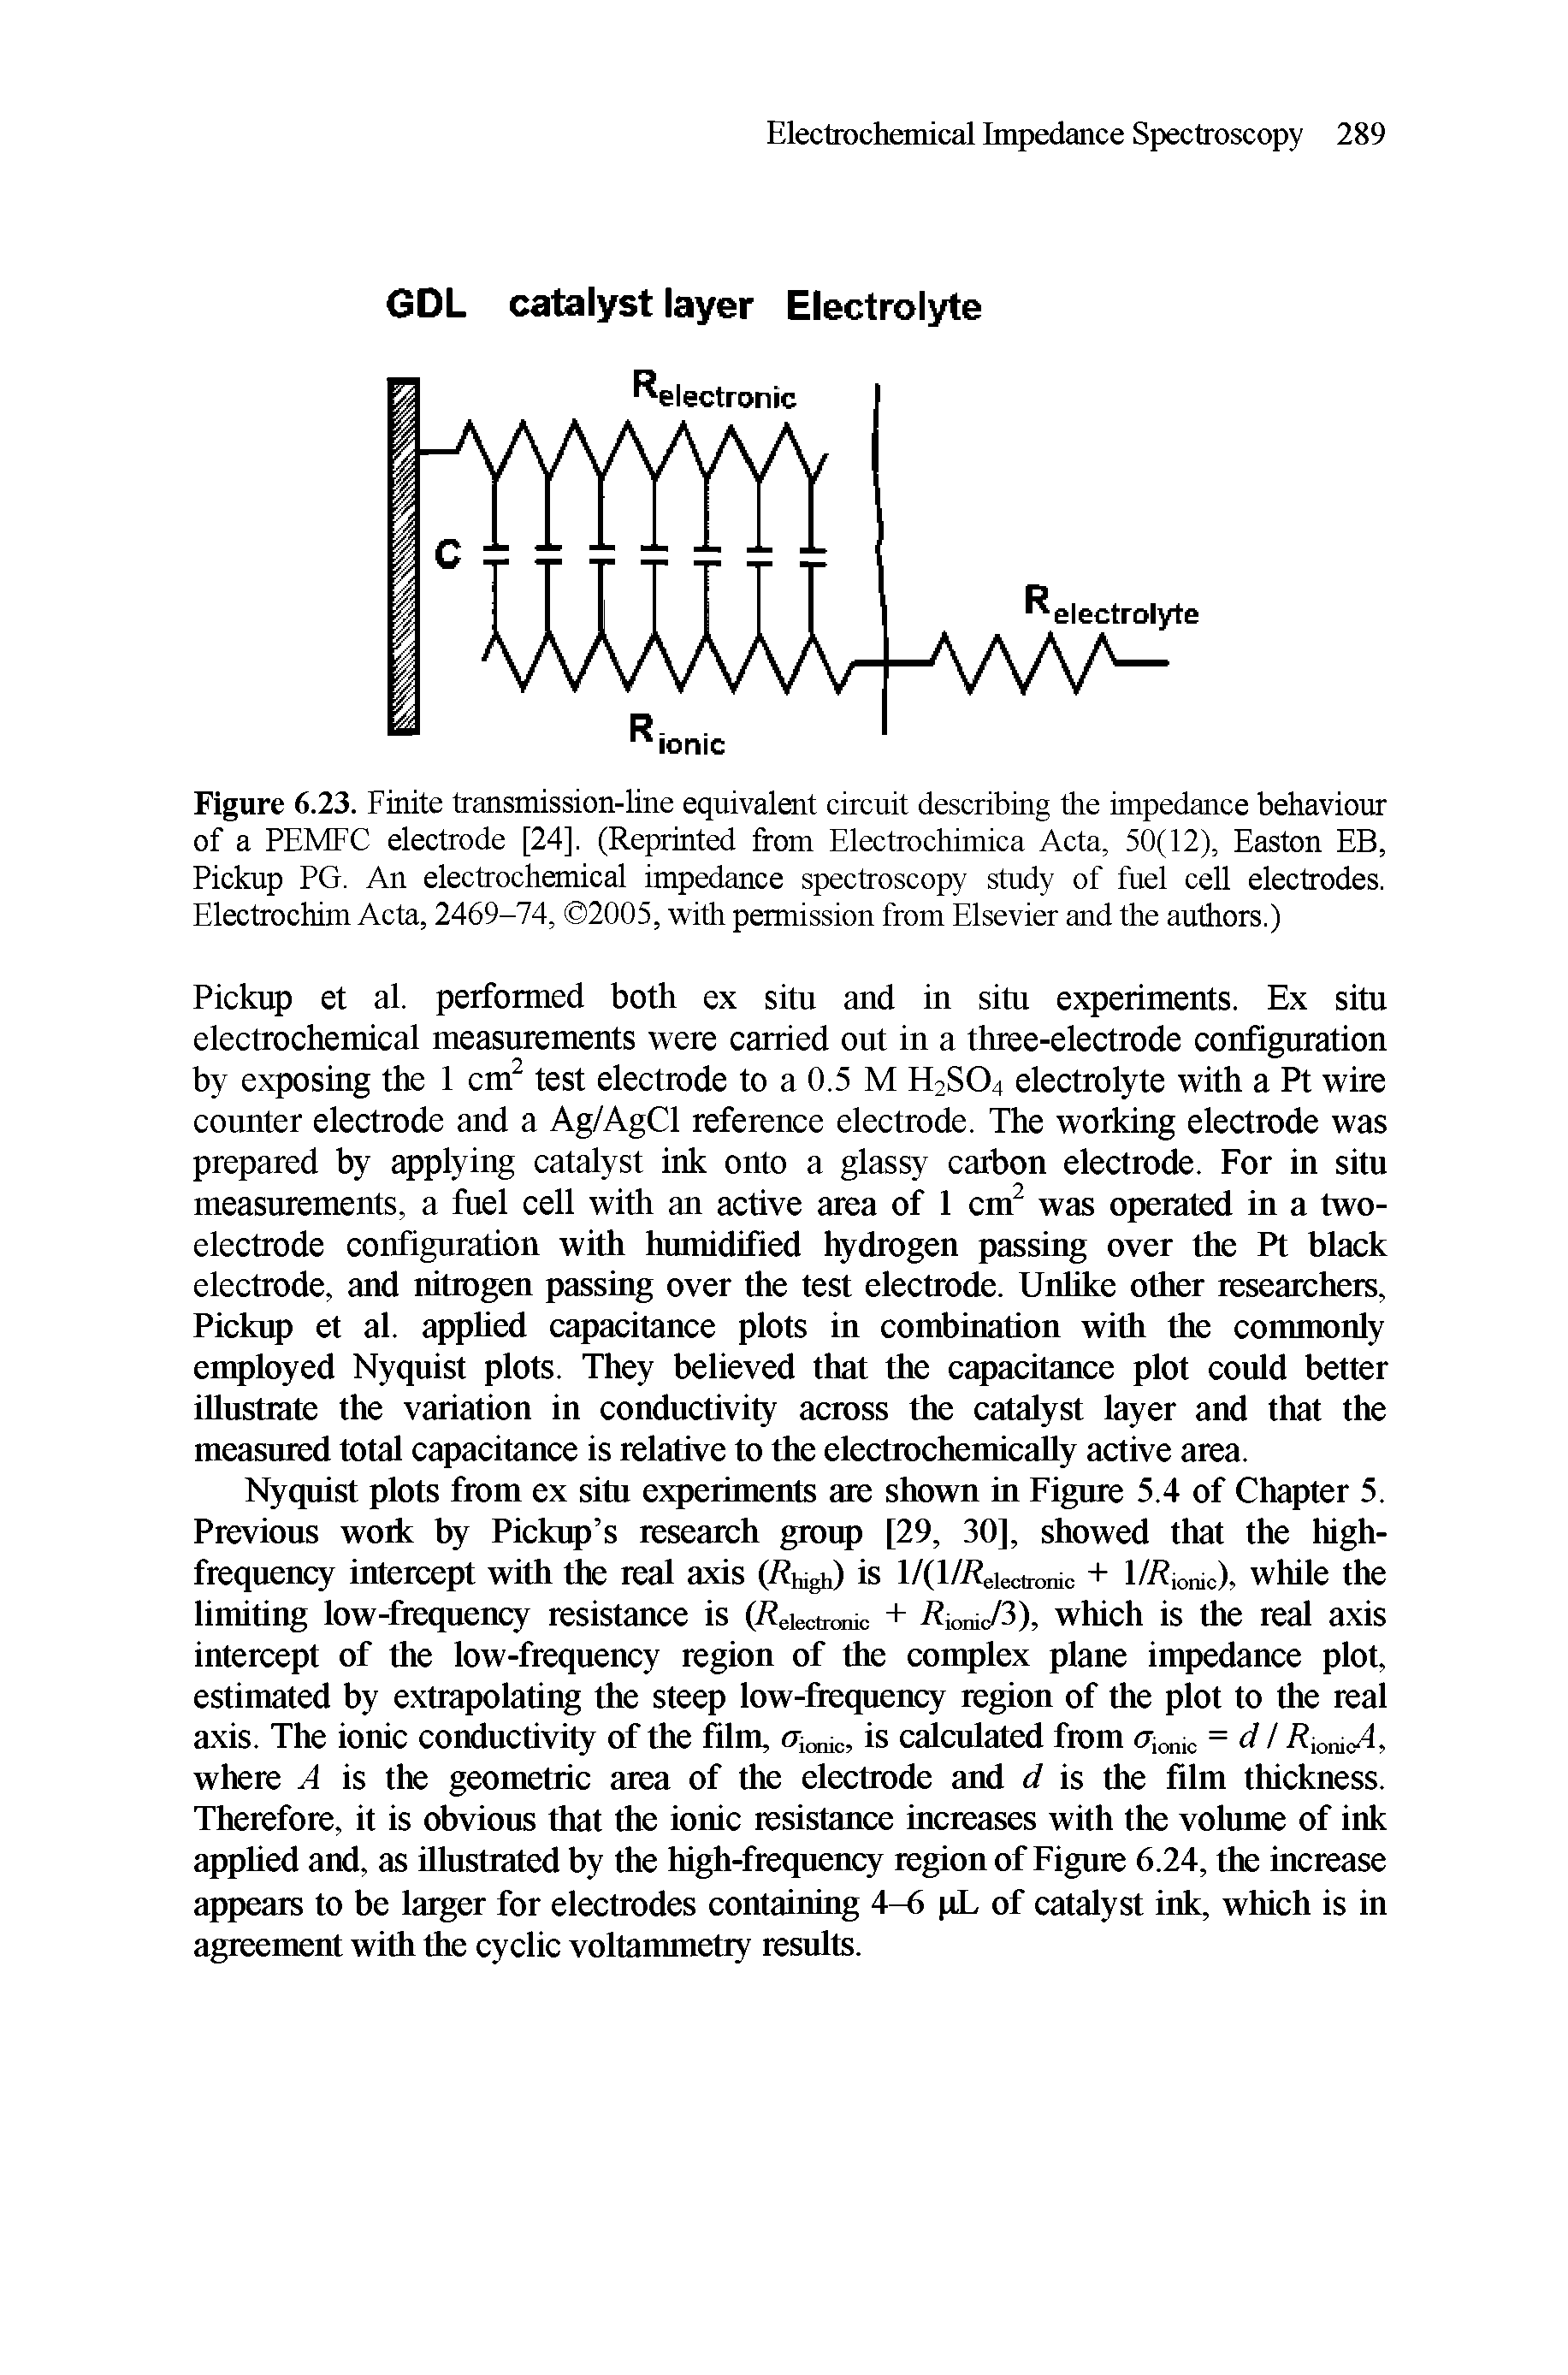 Figure 6.23. Finite transmission-line equivalent circuit describing the impedance behaviour of a PEMFC electrode [24], (Reprinted from Electrochimica Acta, 50(12), Easton EB, Pickup PG. An electrochemical impedance spectroscopy study of fuel cell electrodes. Electrochim Acta, 2469-74, 2005, with permission from Elsevier and the authors.)...